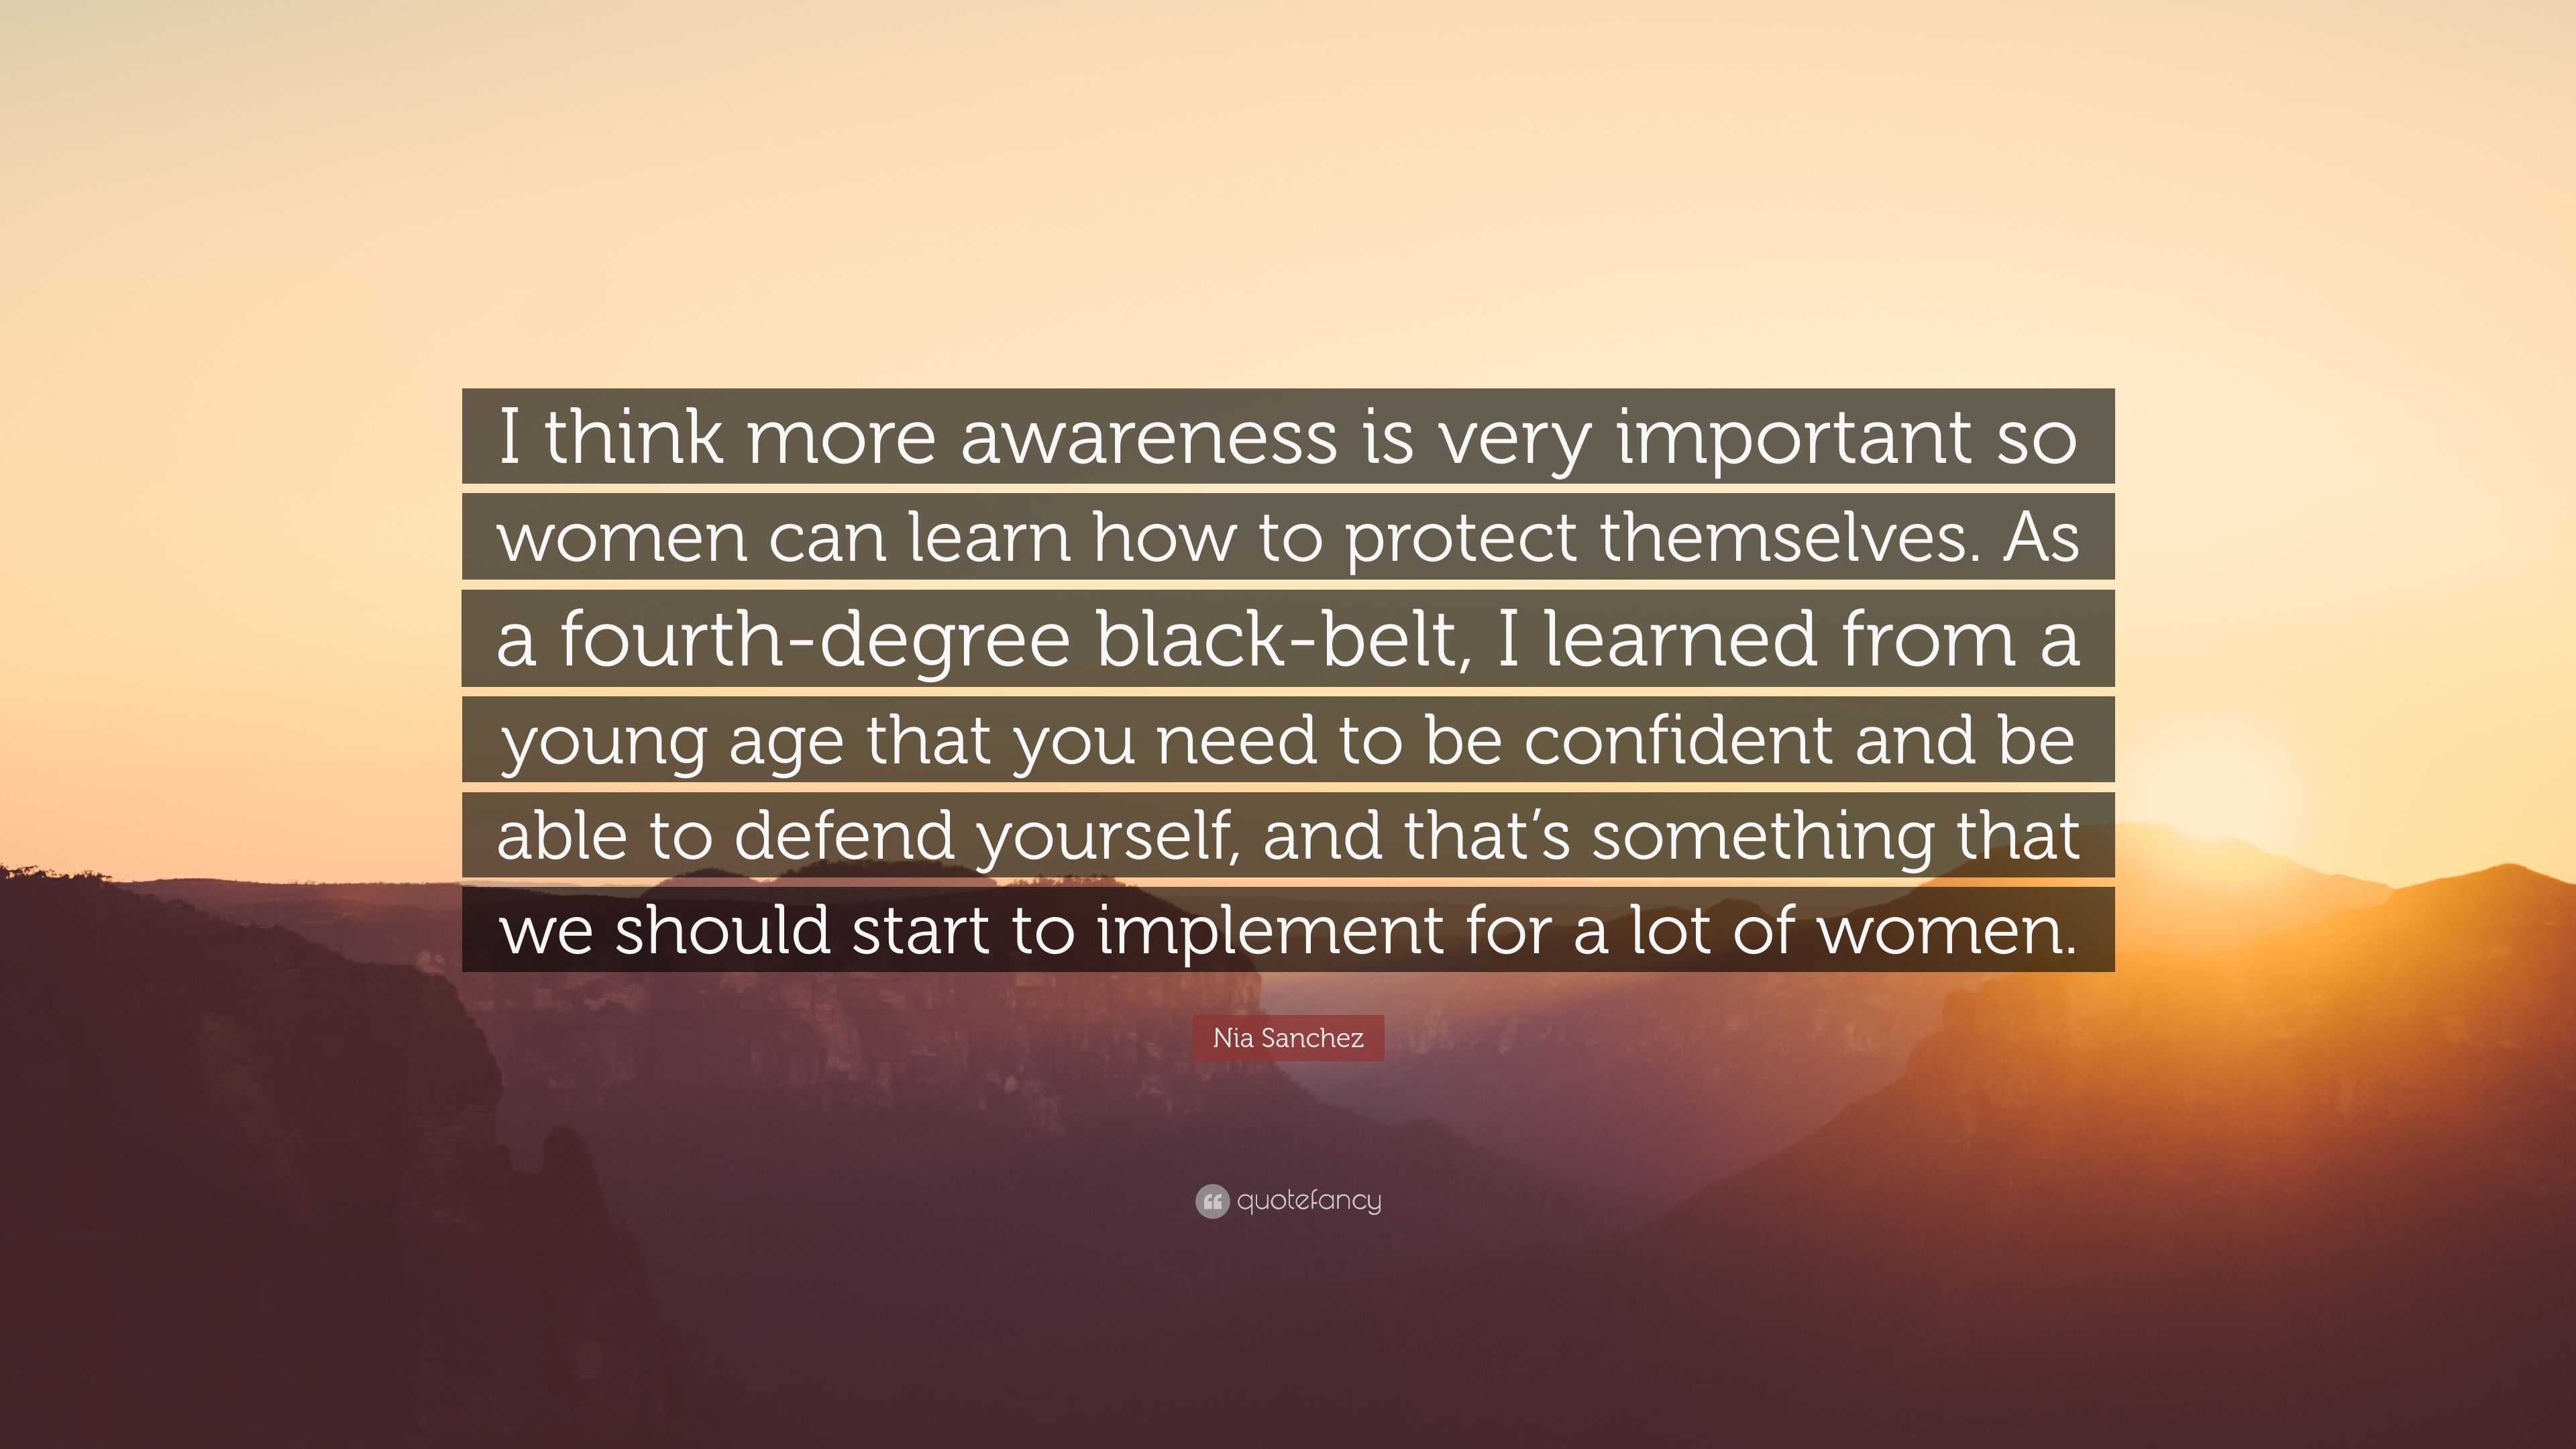 Nia Sanchez Quote: “I think more awareness is very important so women ...